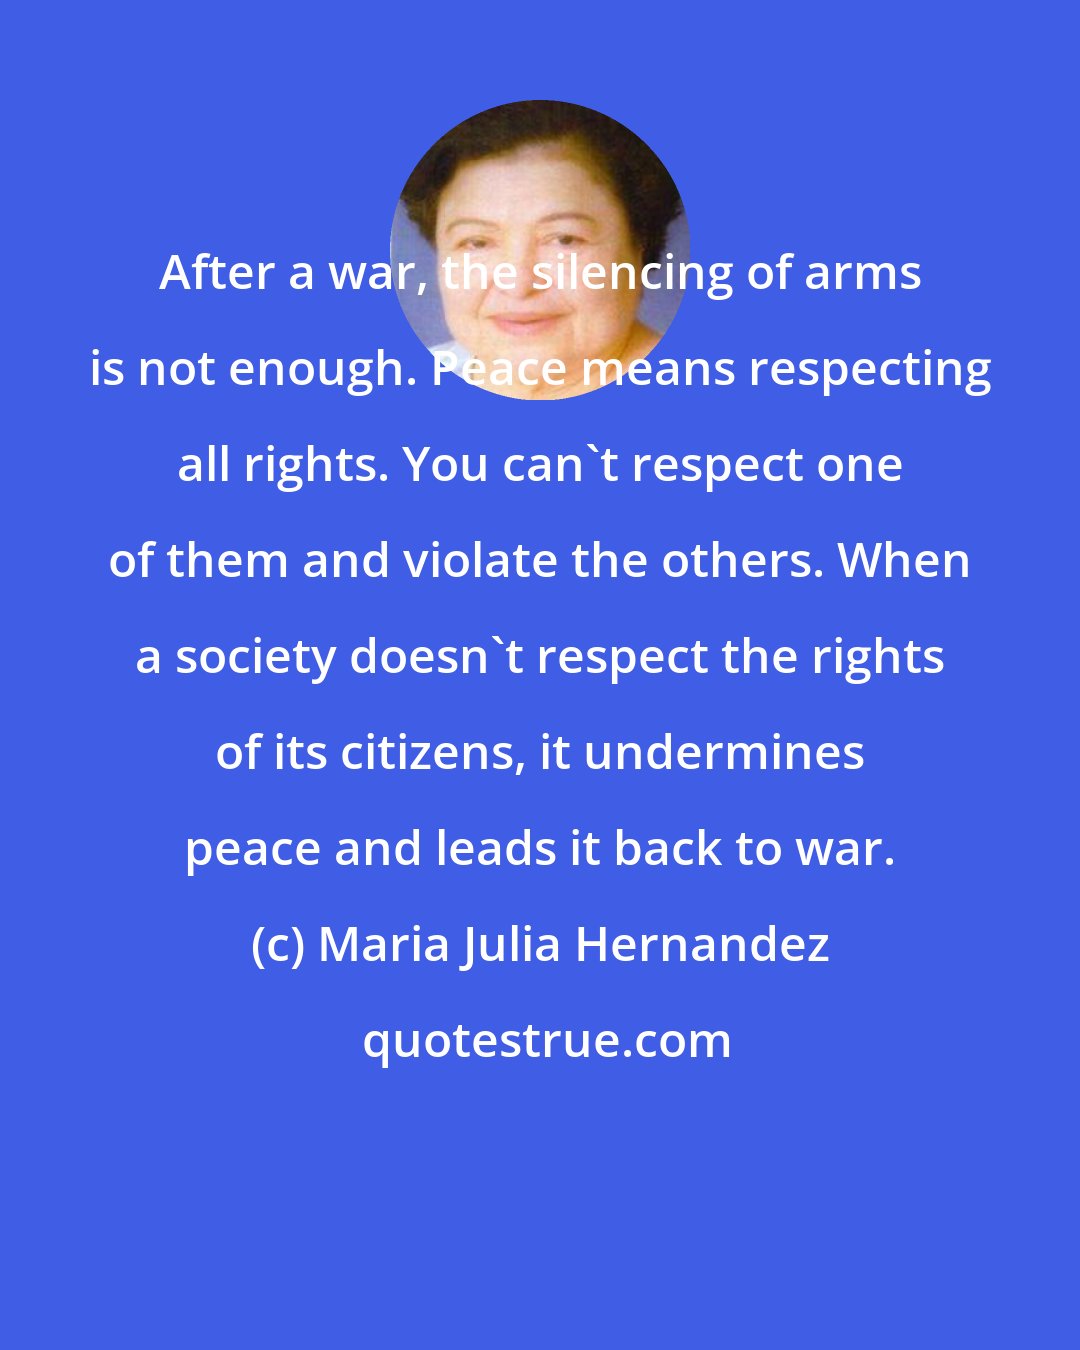 Maria Julia Hernandez: After a war, the silencing of arms is not enough. Peace means respecting all rights. You can't respect one of them and violate the others. When a society doesn't respect the rights of its citizens, it undermines peace and leads it back to war.